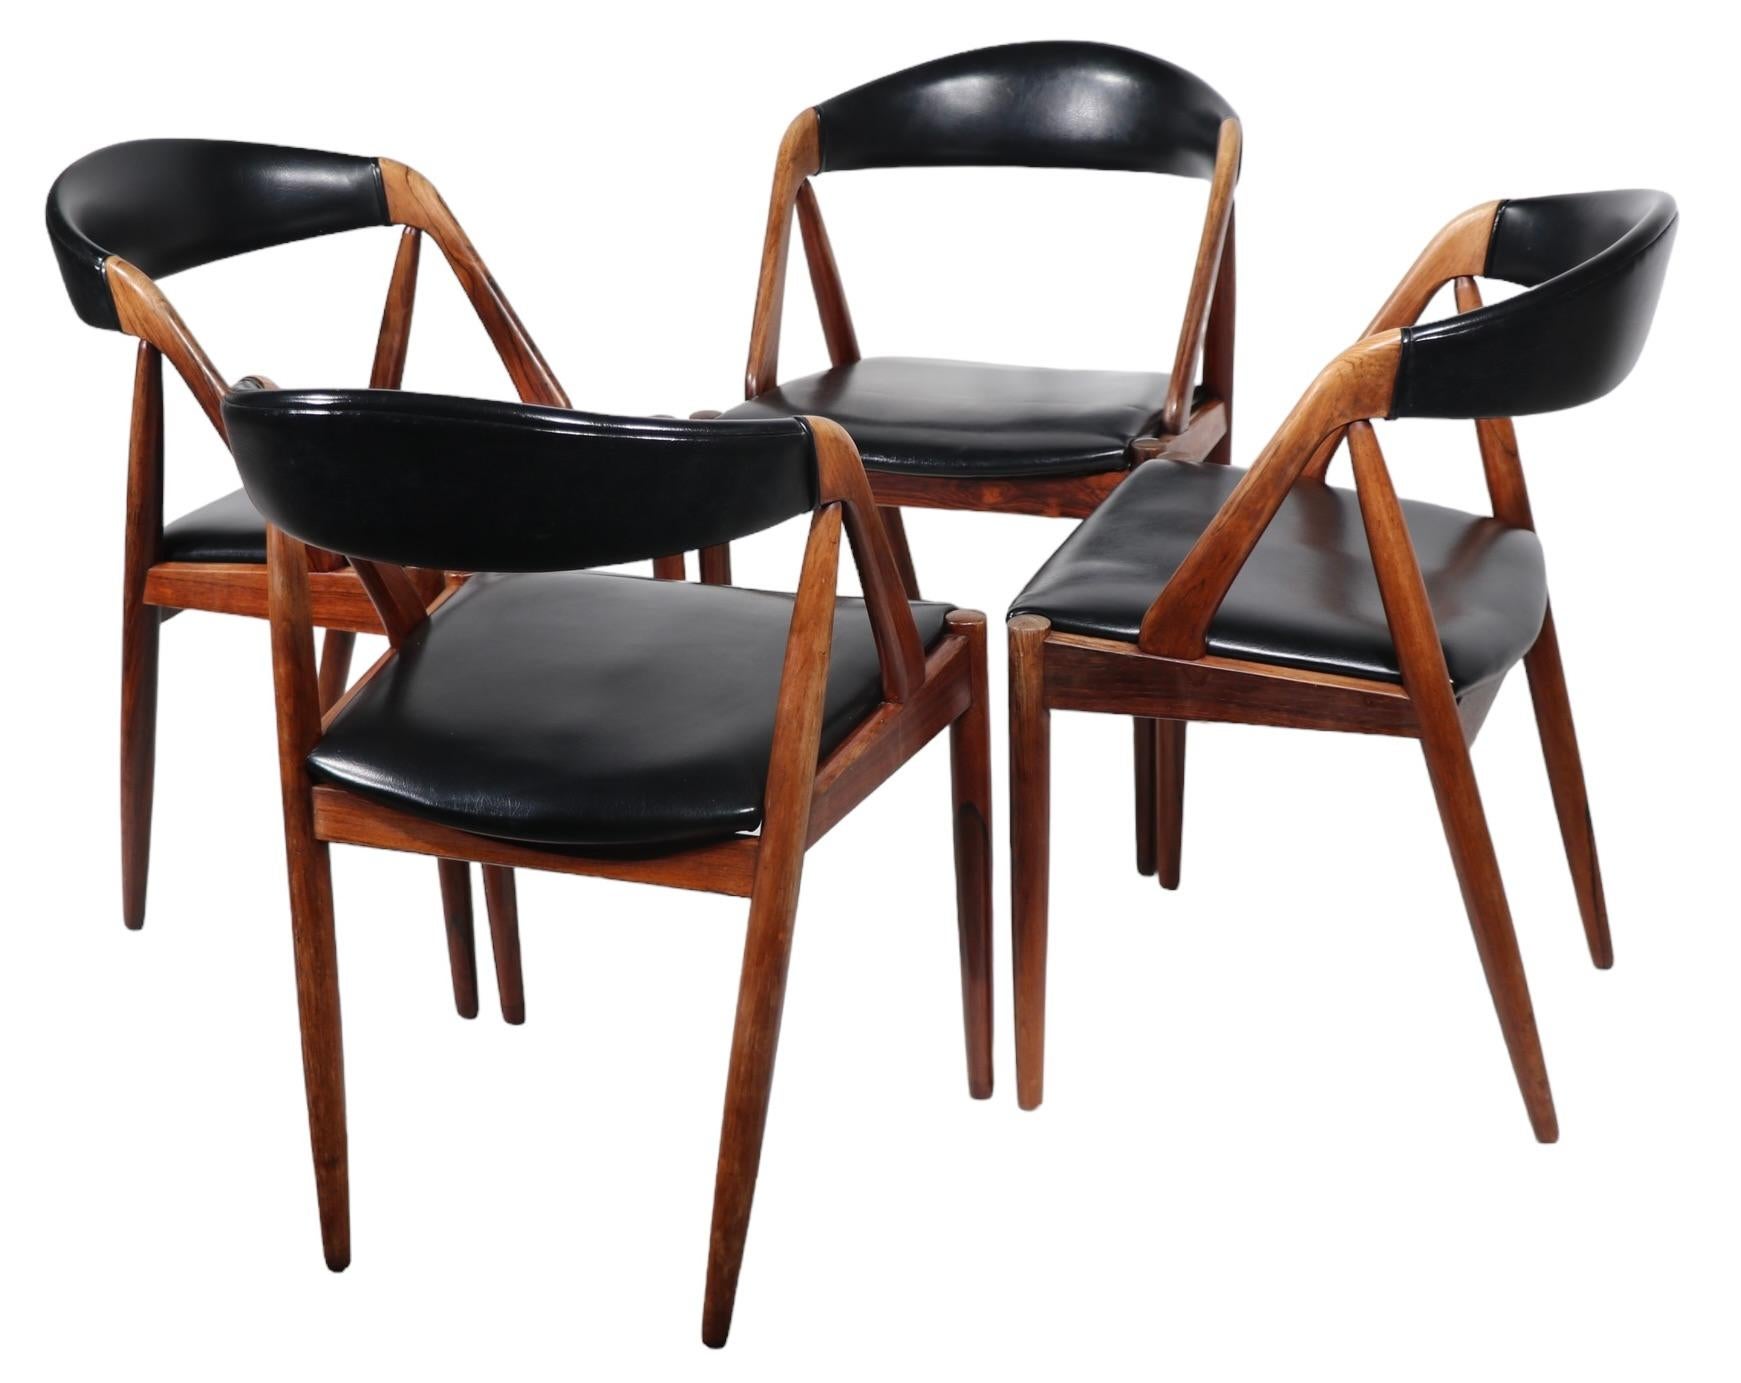  4 Rosewood Model 31 Danish Mid Century Modern Dining Chairs by Kai Kristiansen  For Sale 3